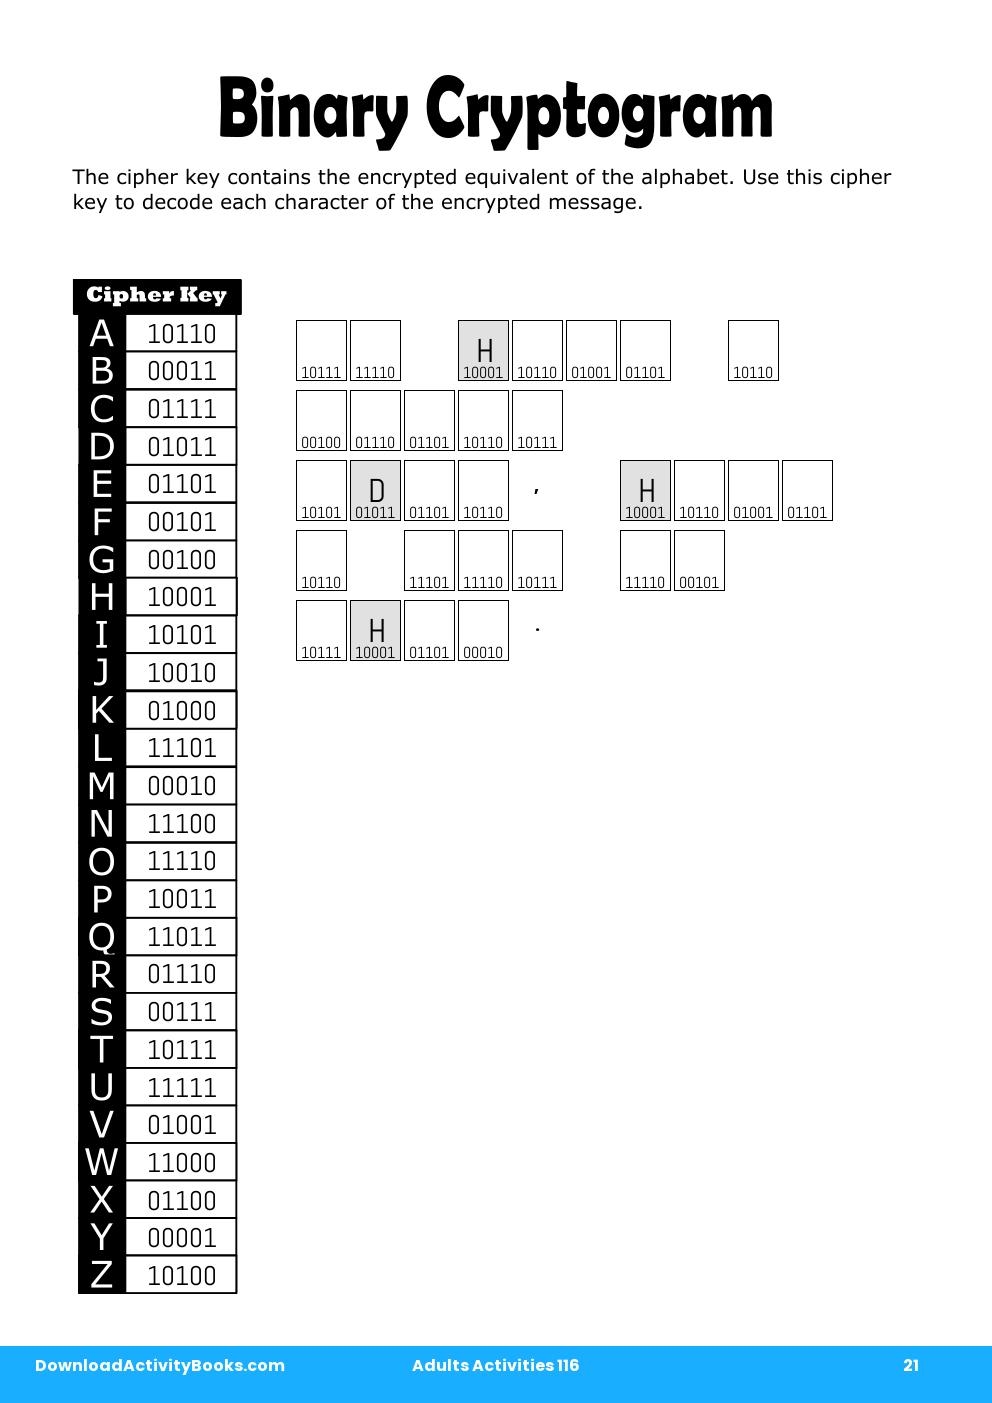 Binary Cryptogram in Adults Activities 116